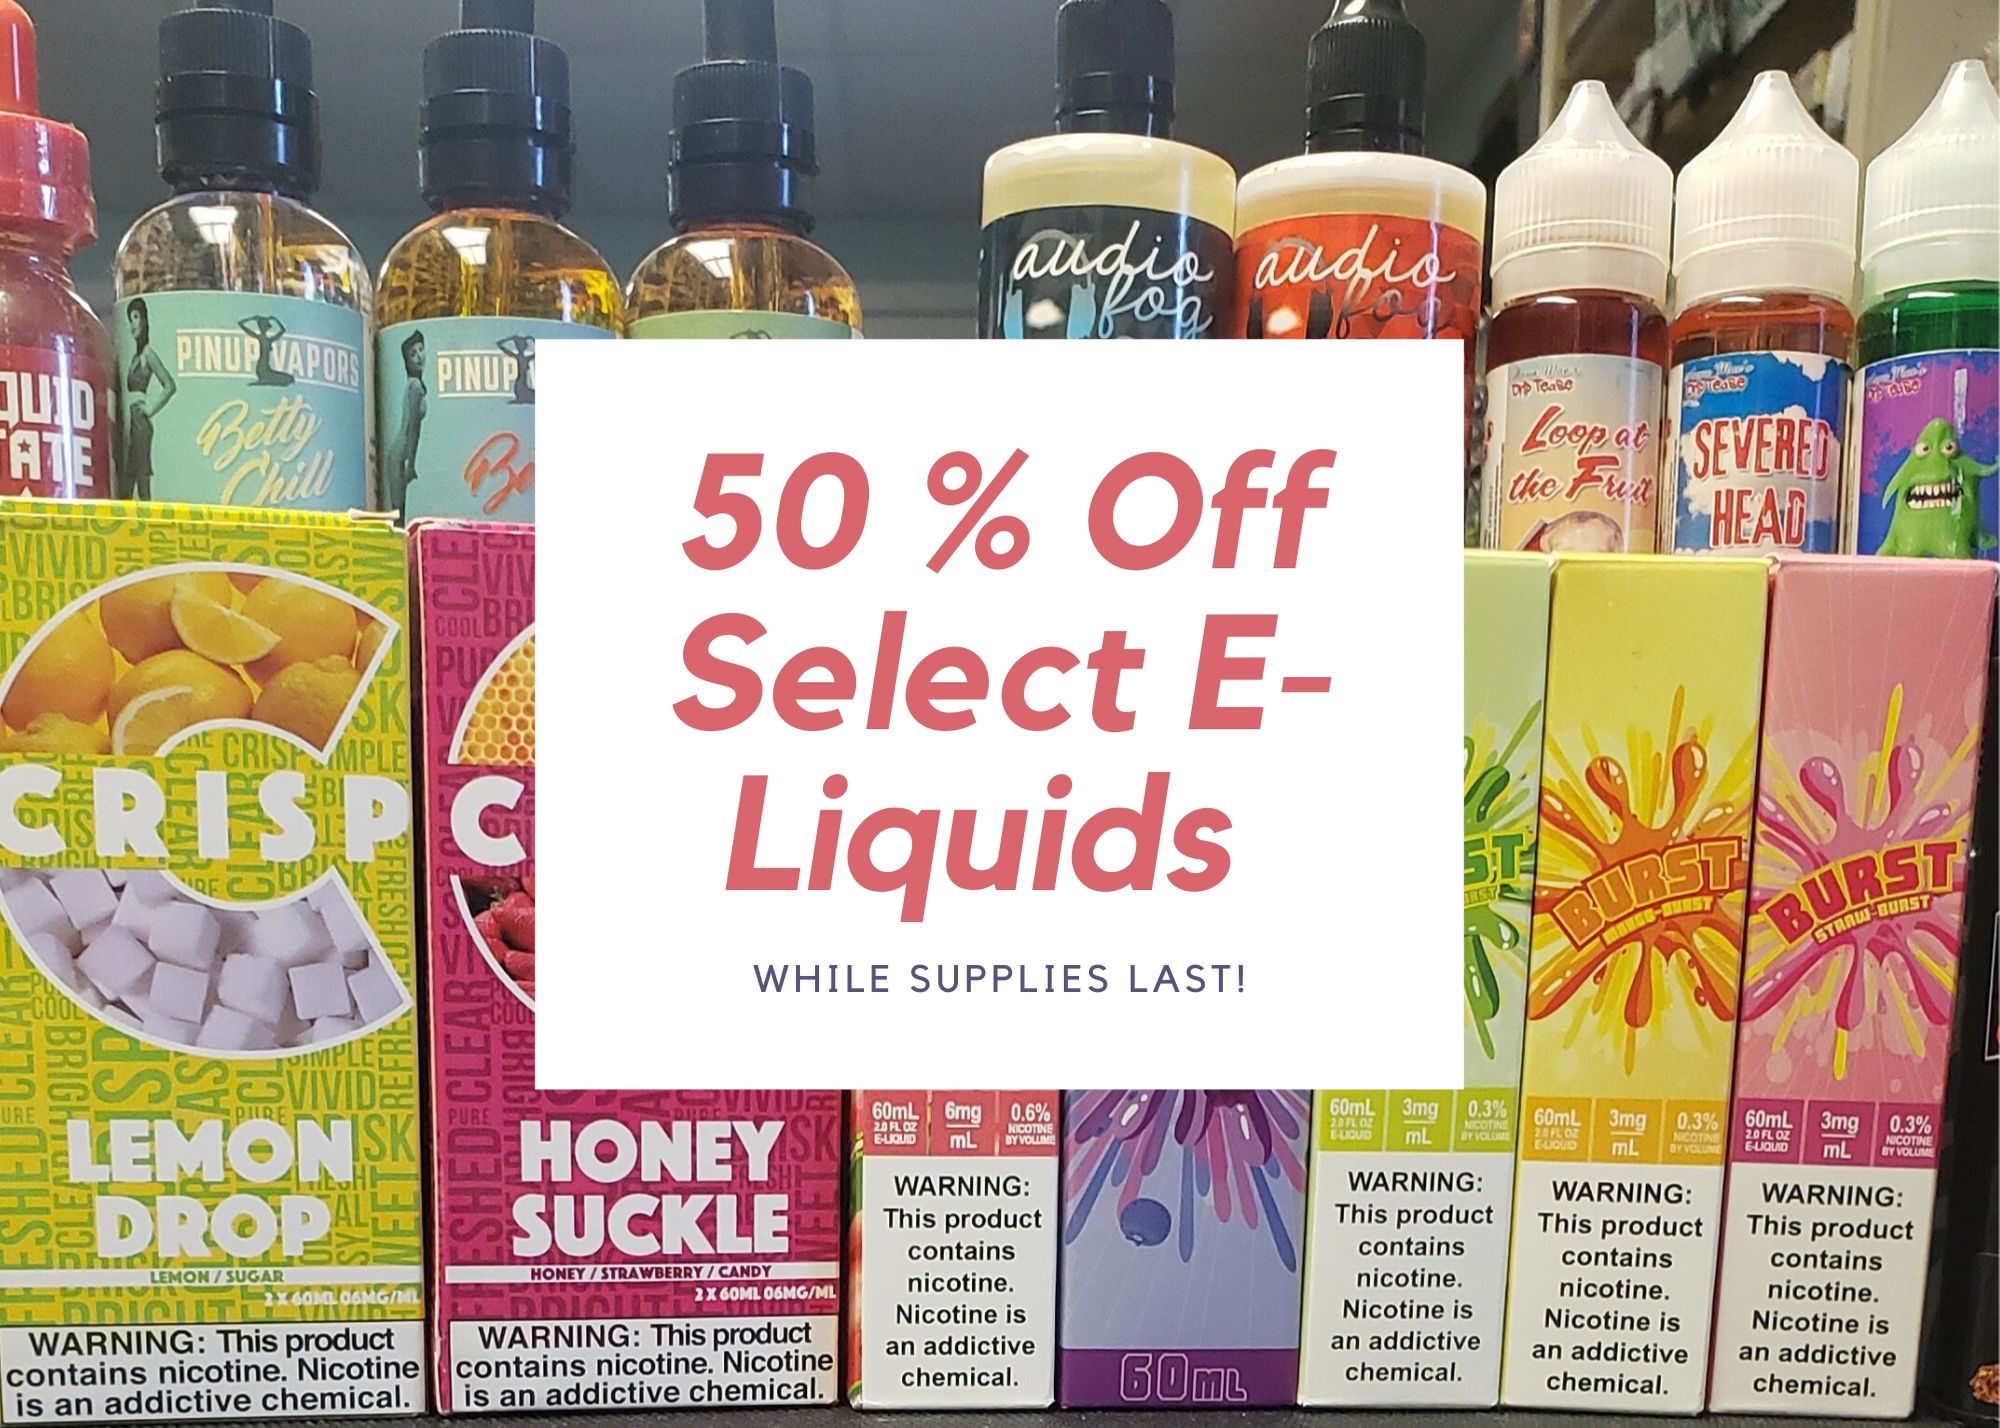 50% off select e-juices